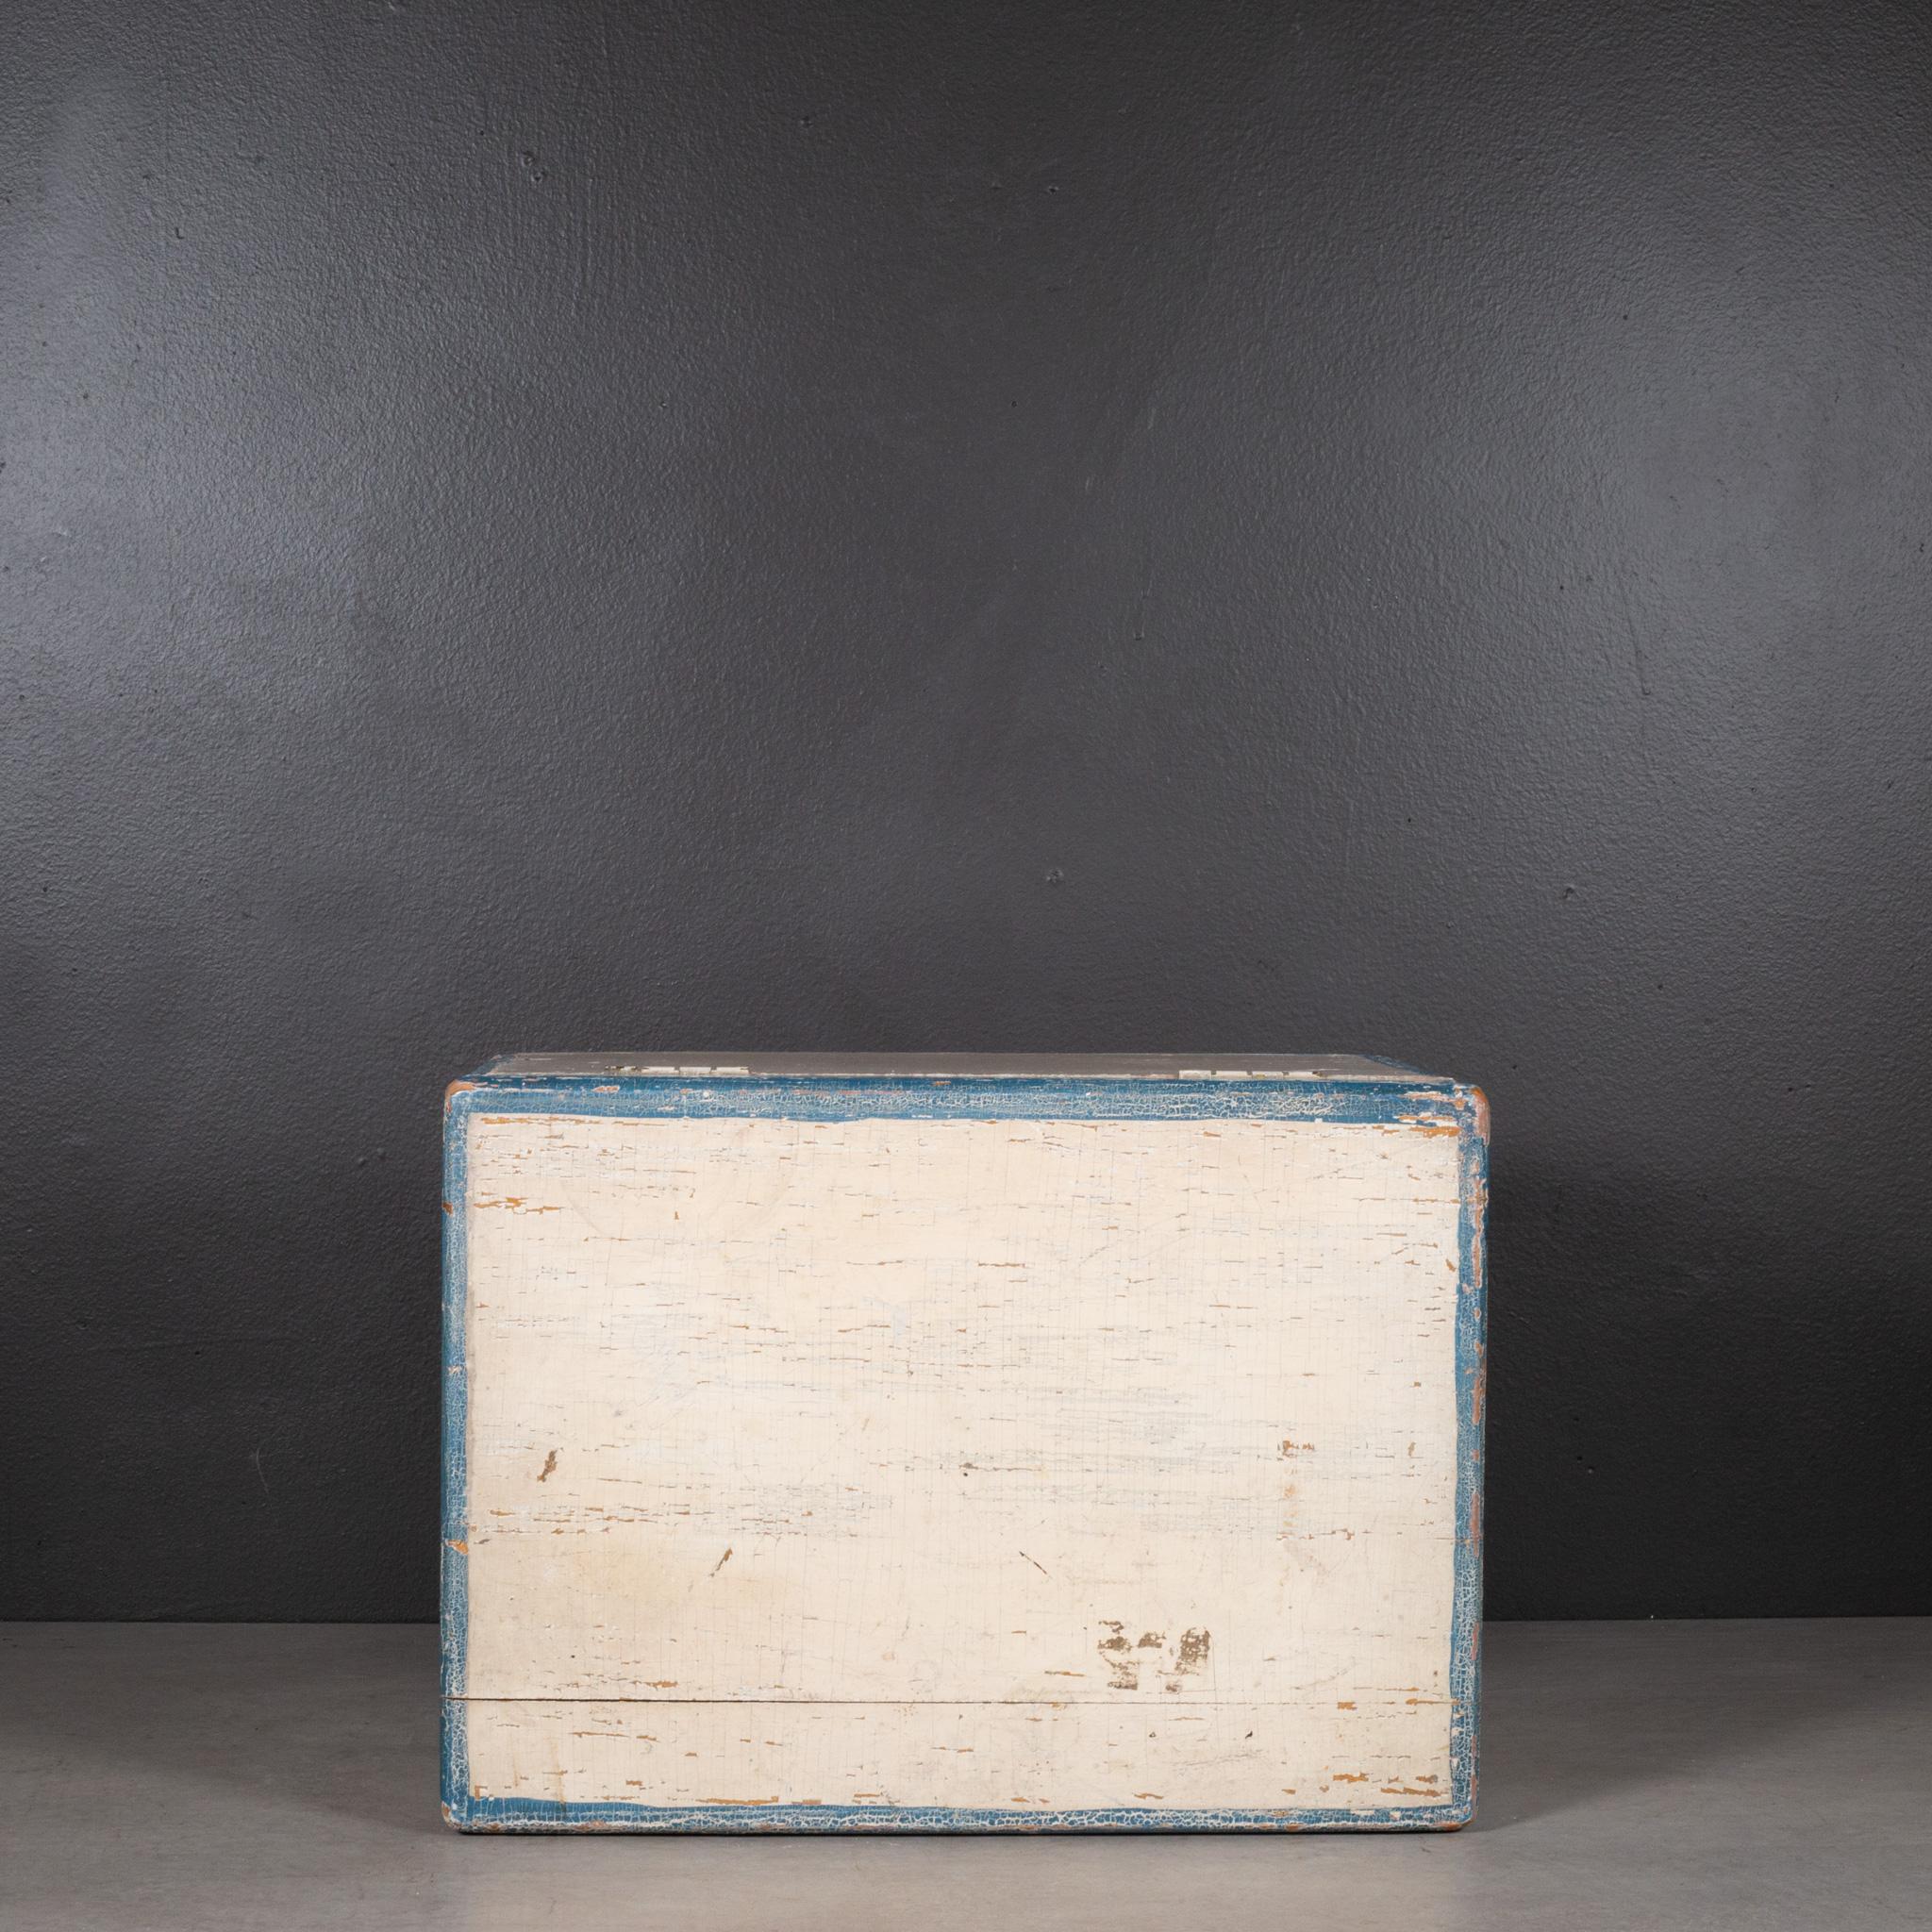 Handmade Monogrammed Wooden Toolbox with Inner Tray c.1940 (FREE SHIPPING) For Sale 6